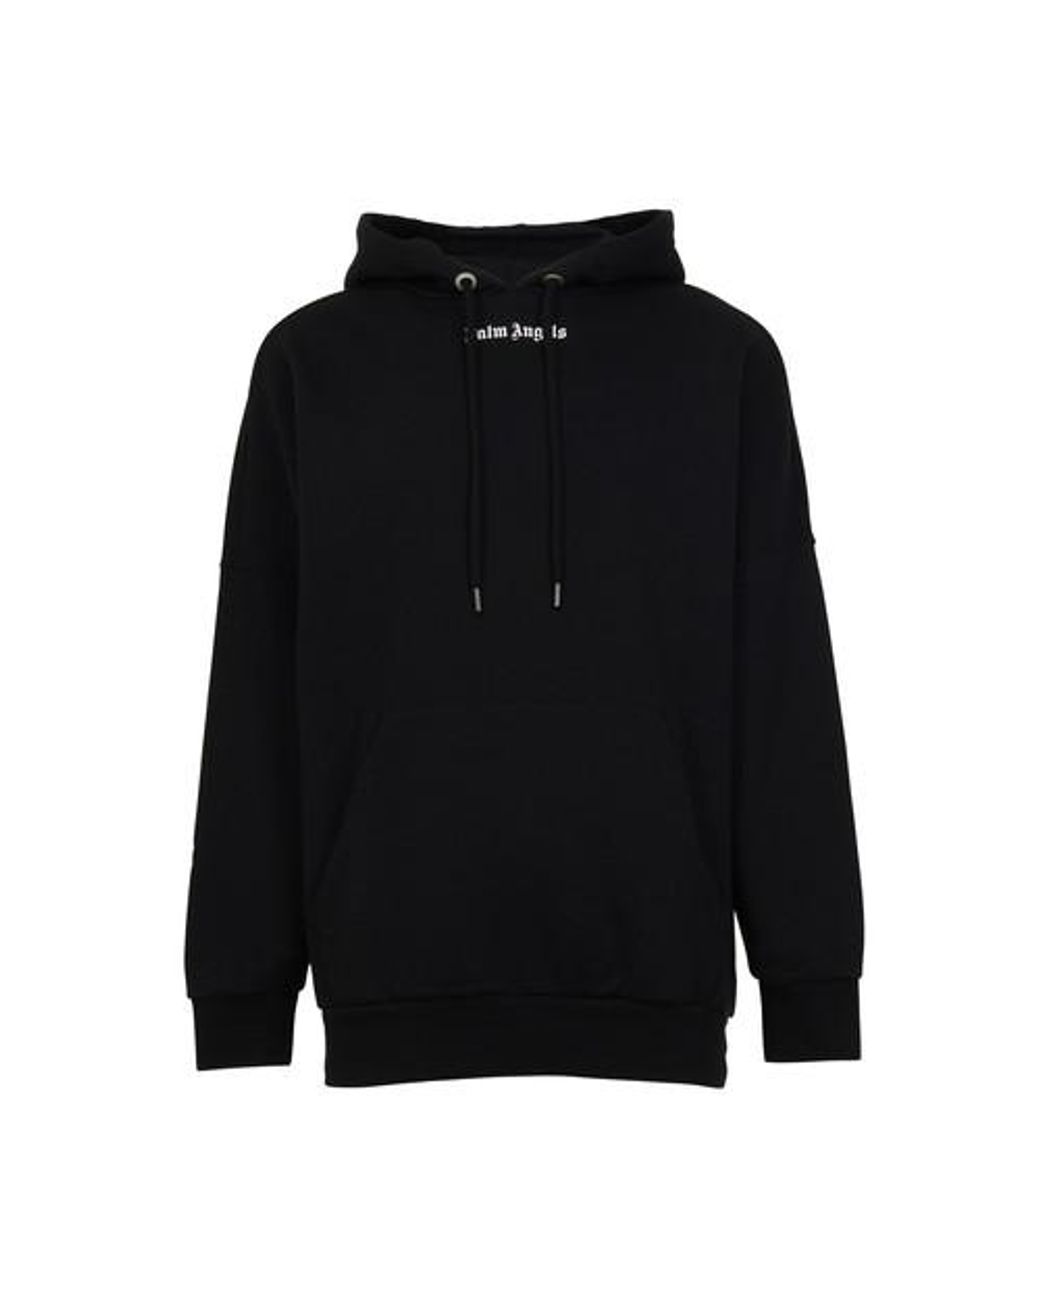 Palm Angels Classic Logo Hoodie in Black_white (Black) for Men 